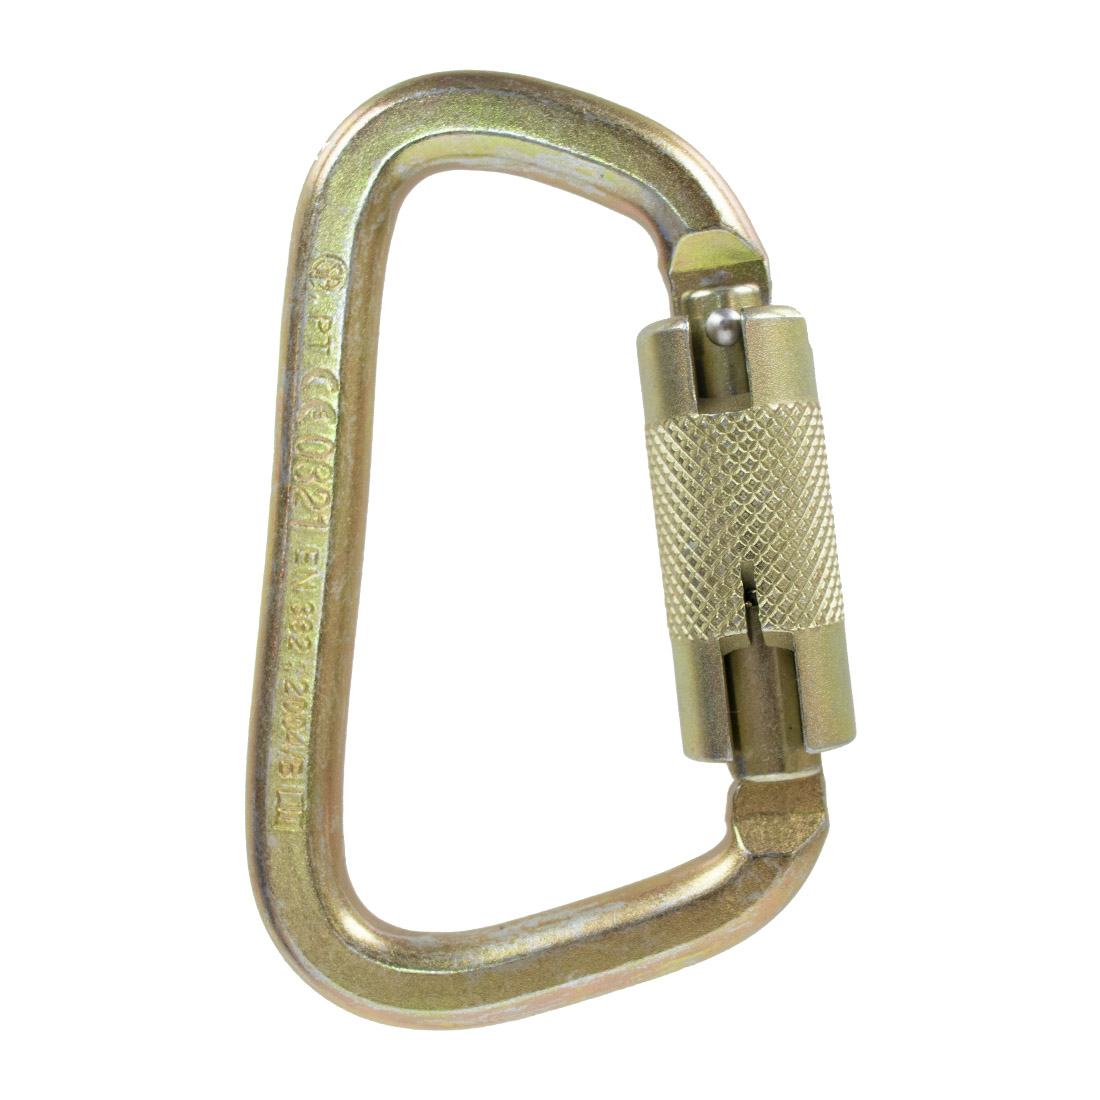 Sky Genie Auto Locking Carabiner - Steel - Left Side Inverted Front View